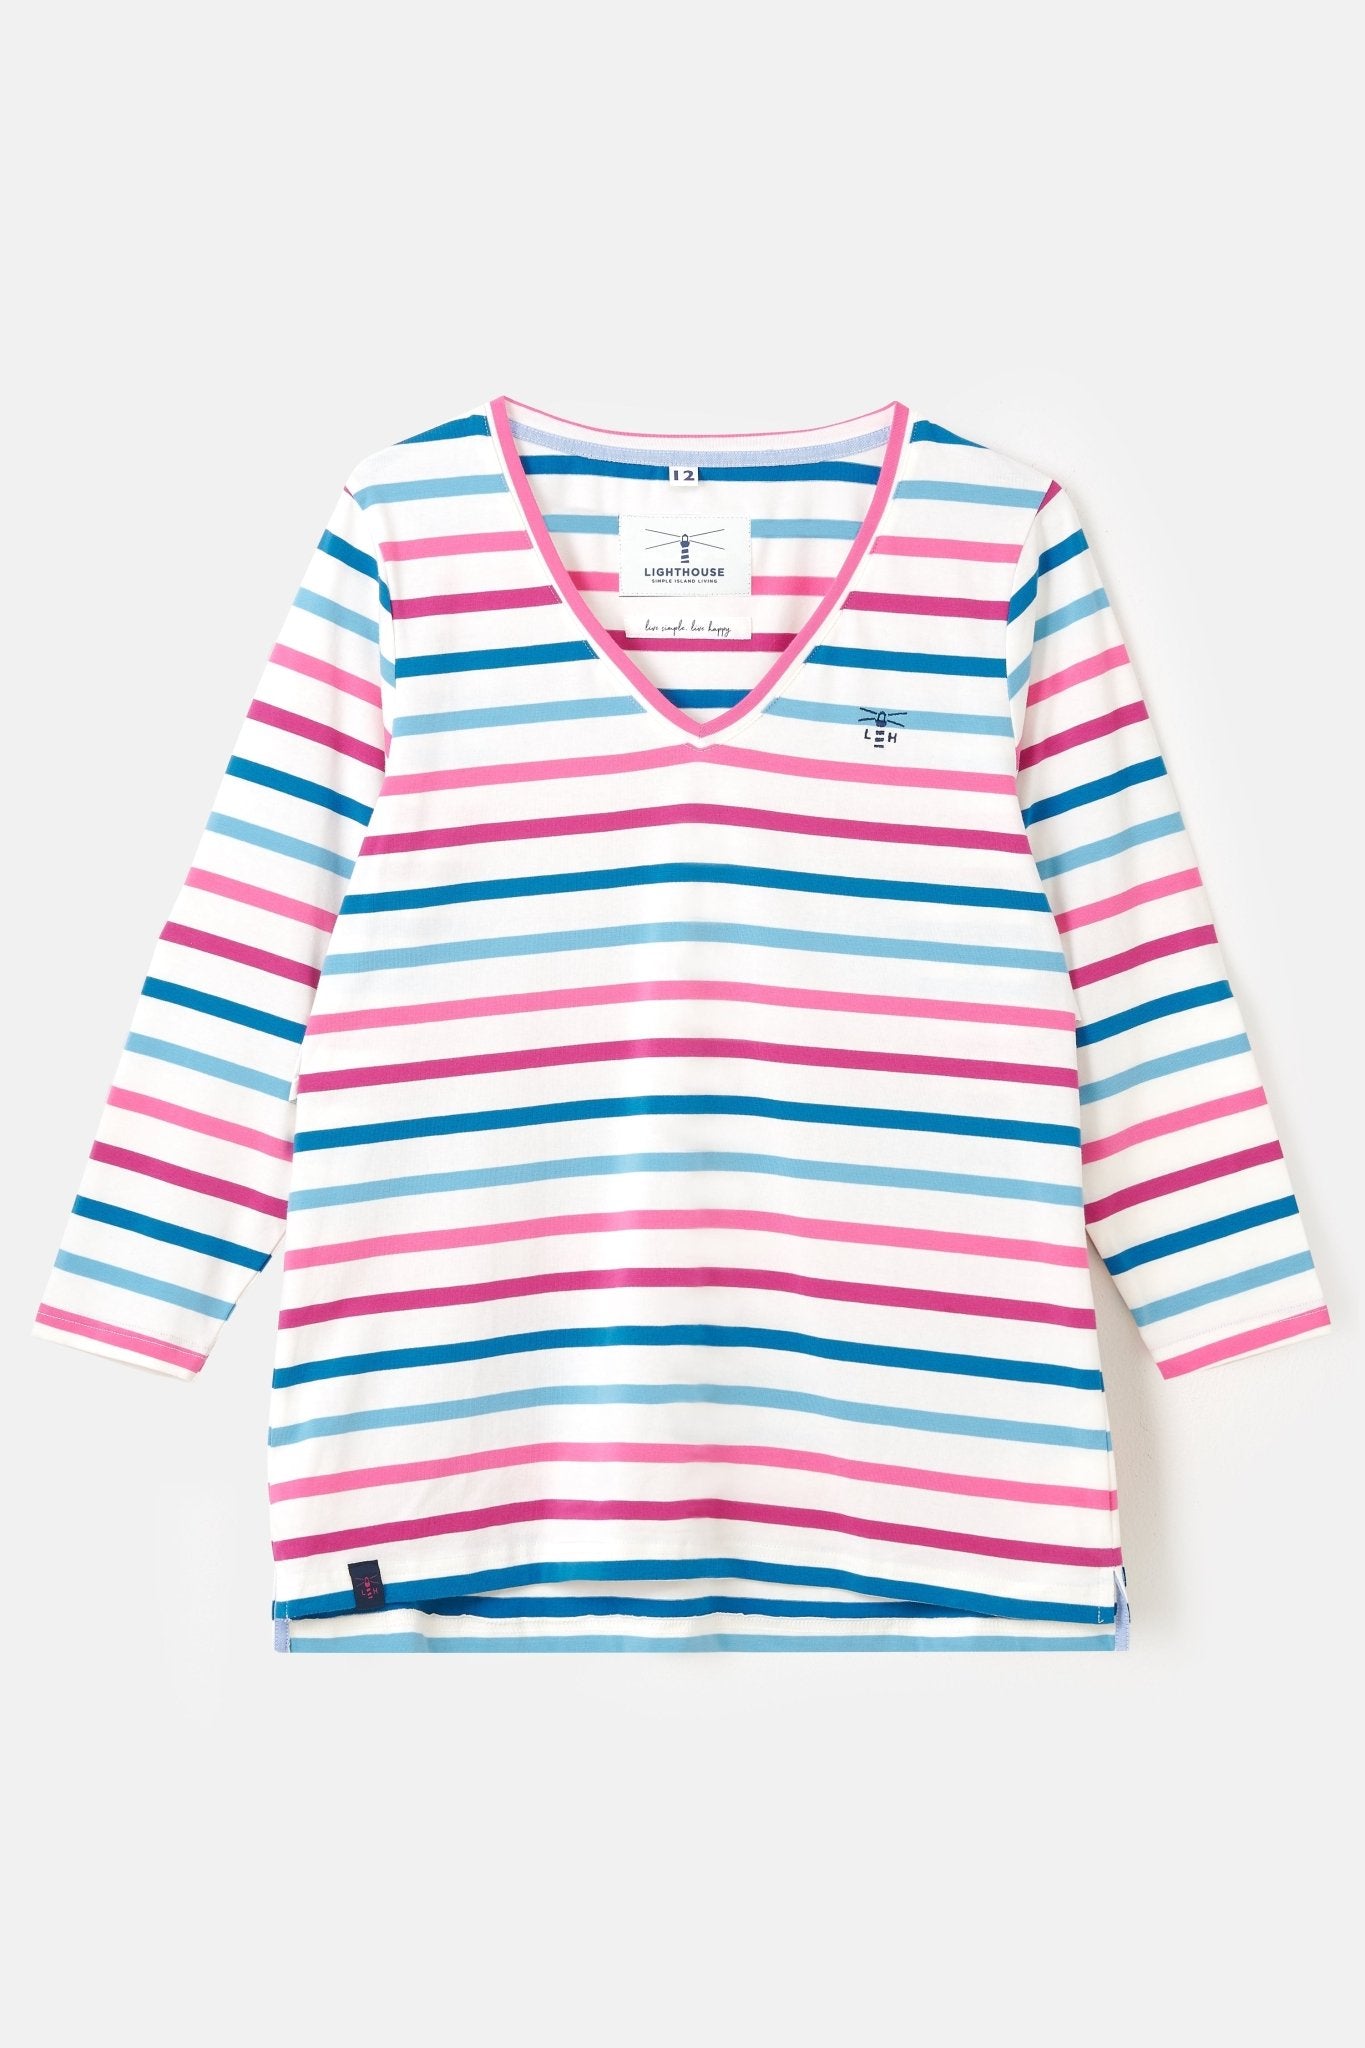 Ariana Top - Berry Teal Stripe-Lighthouse